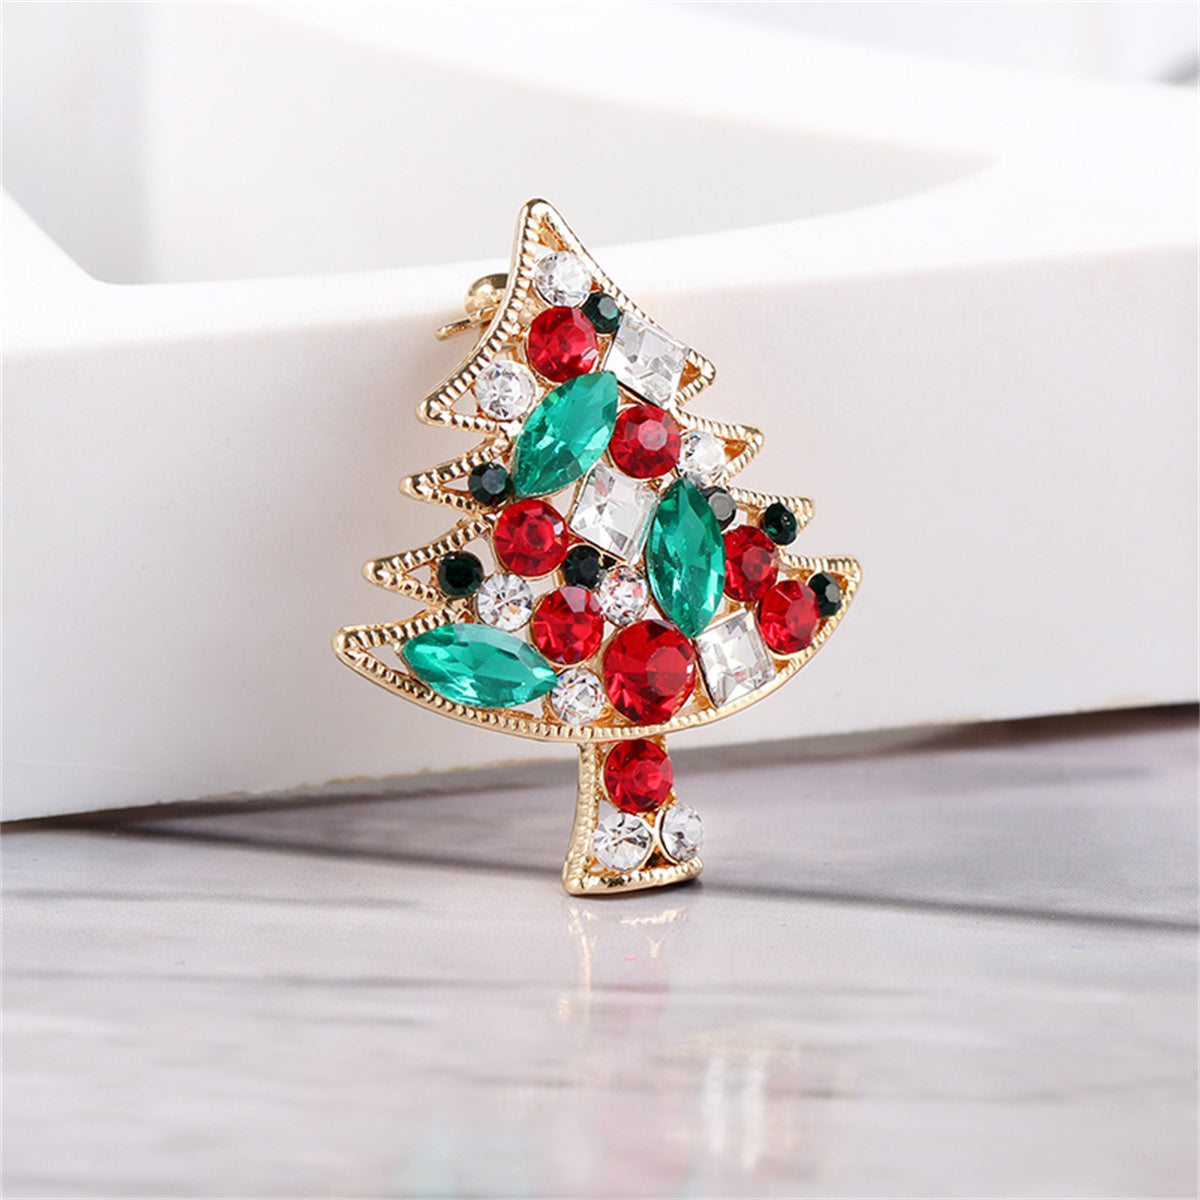 Colored Cubic Zirconia & Crystal Christmas Tree Brooch